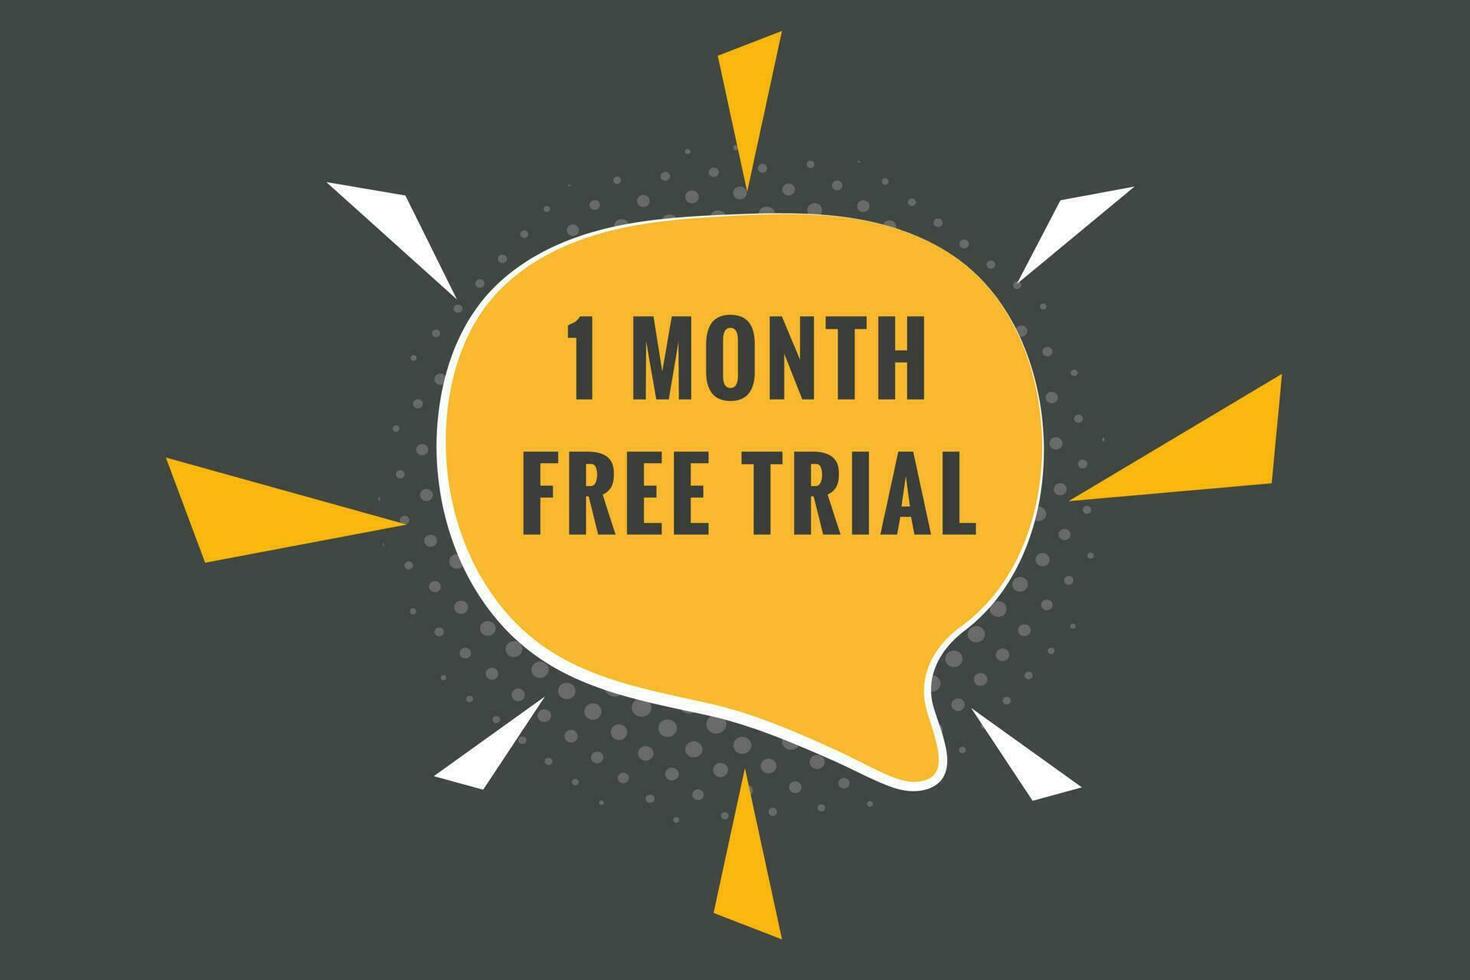 1 Month Free trial Banner Design. 1 month free banner background vector